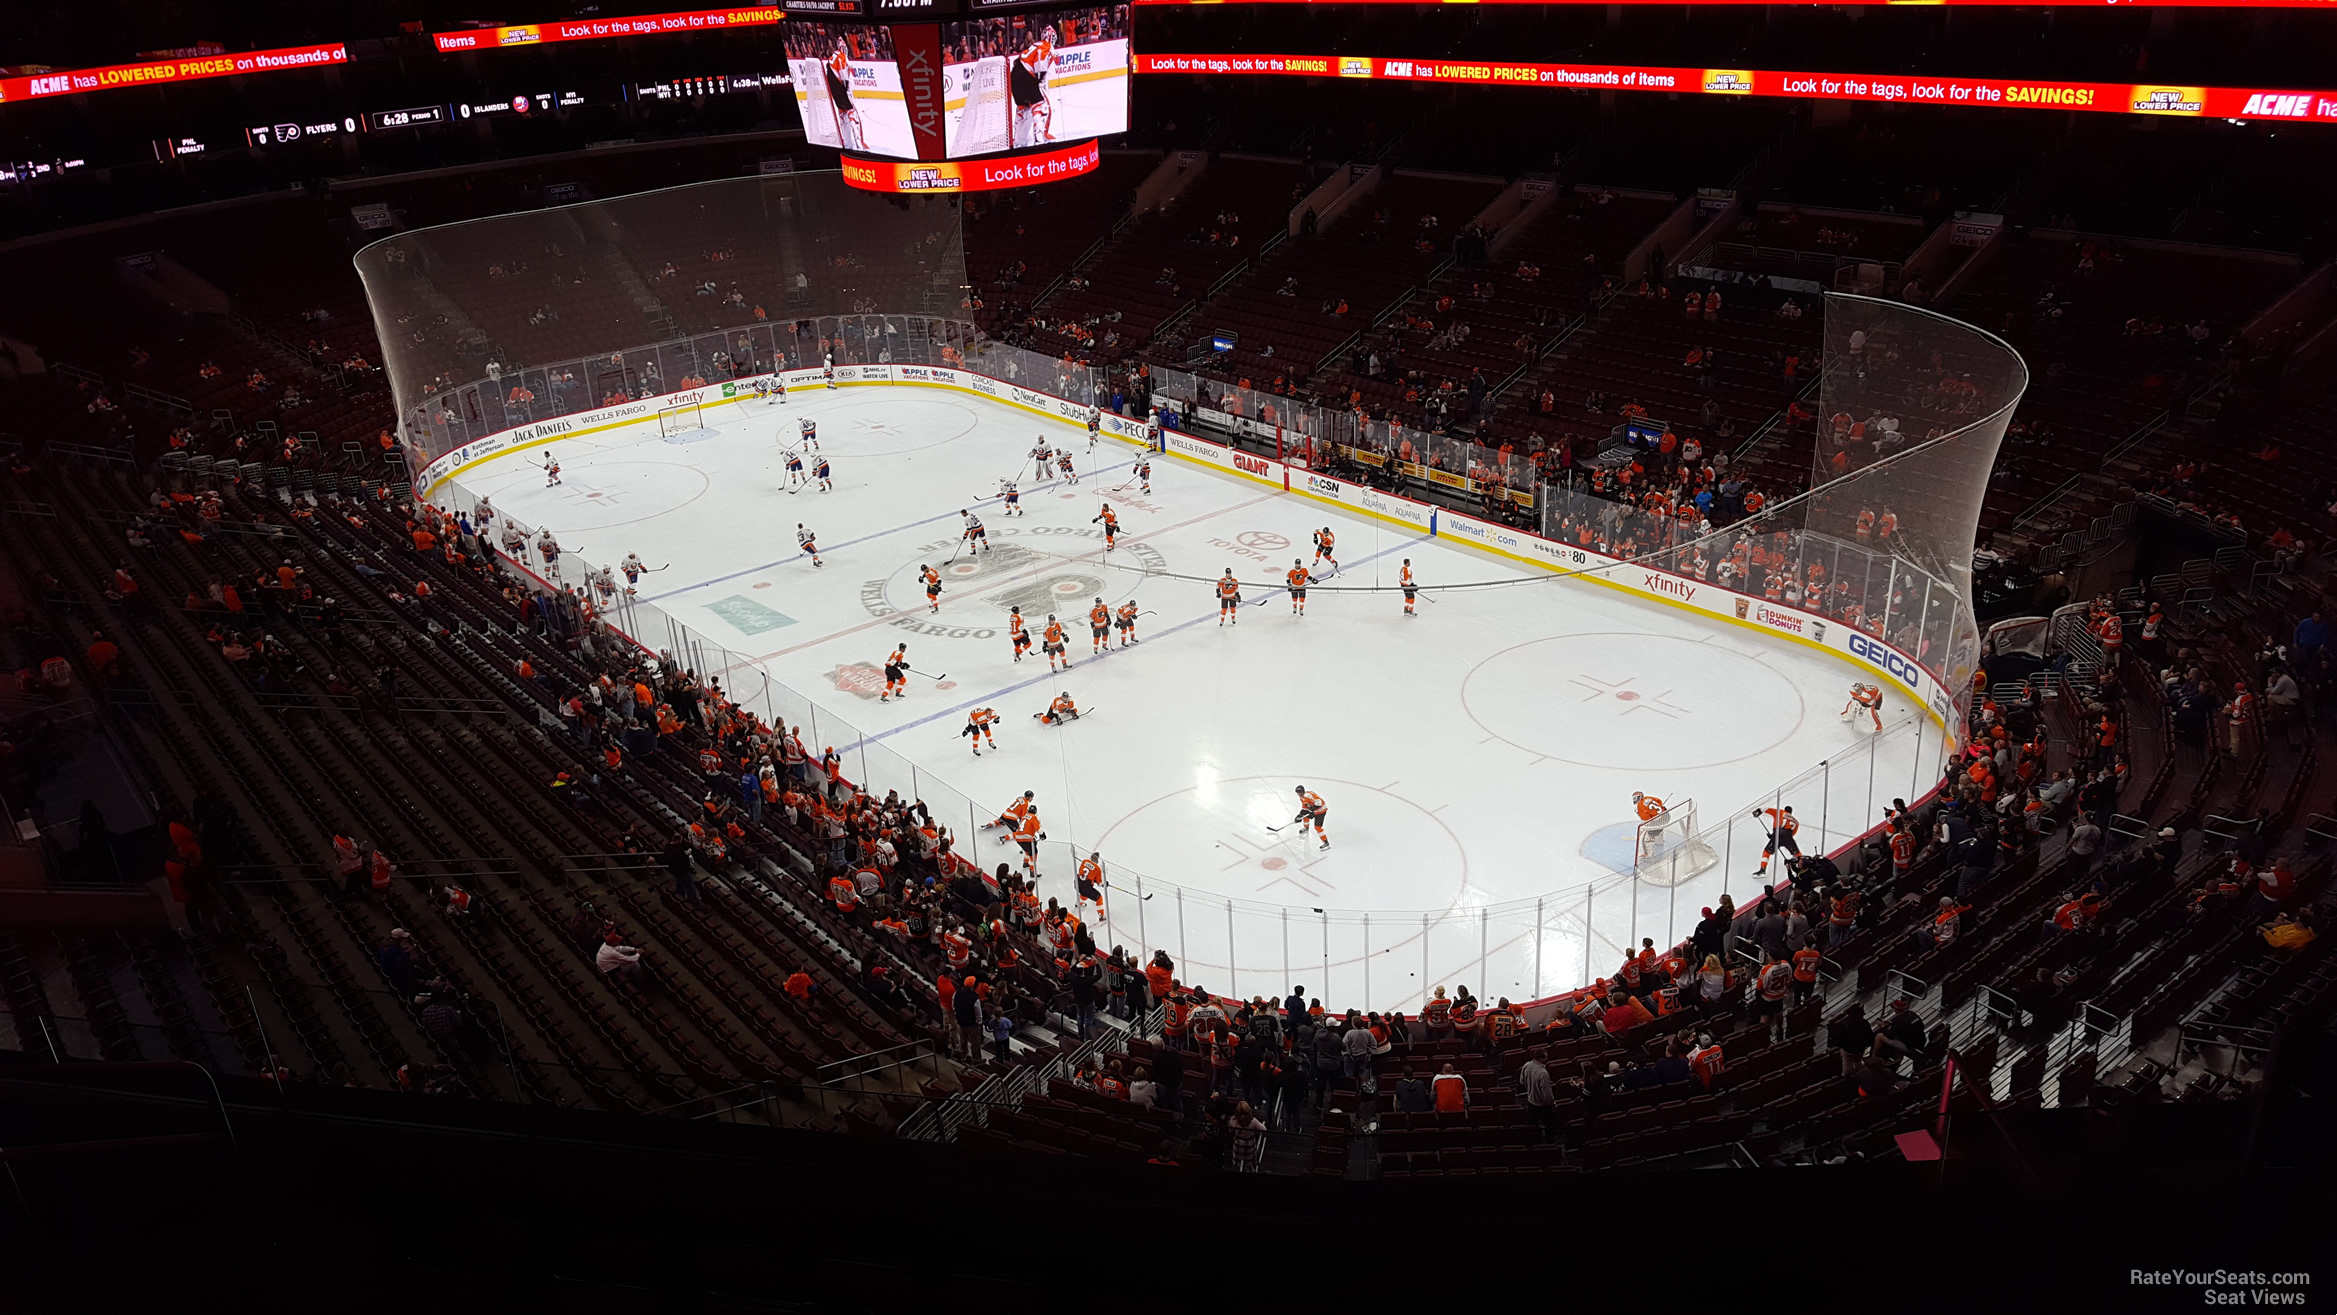 section 217a, row 8 seat view  for hockey - wells fargo center